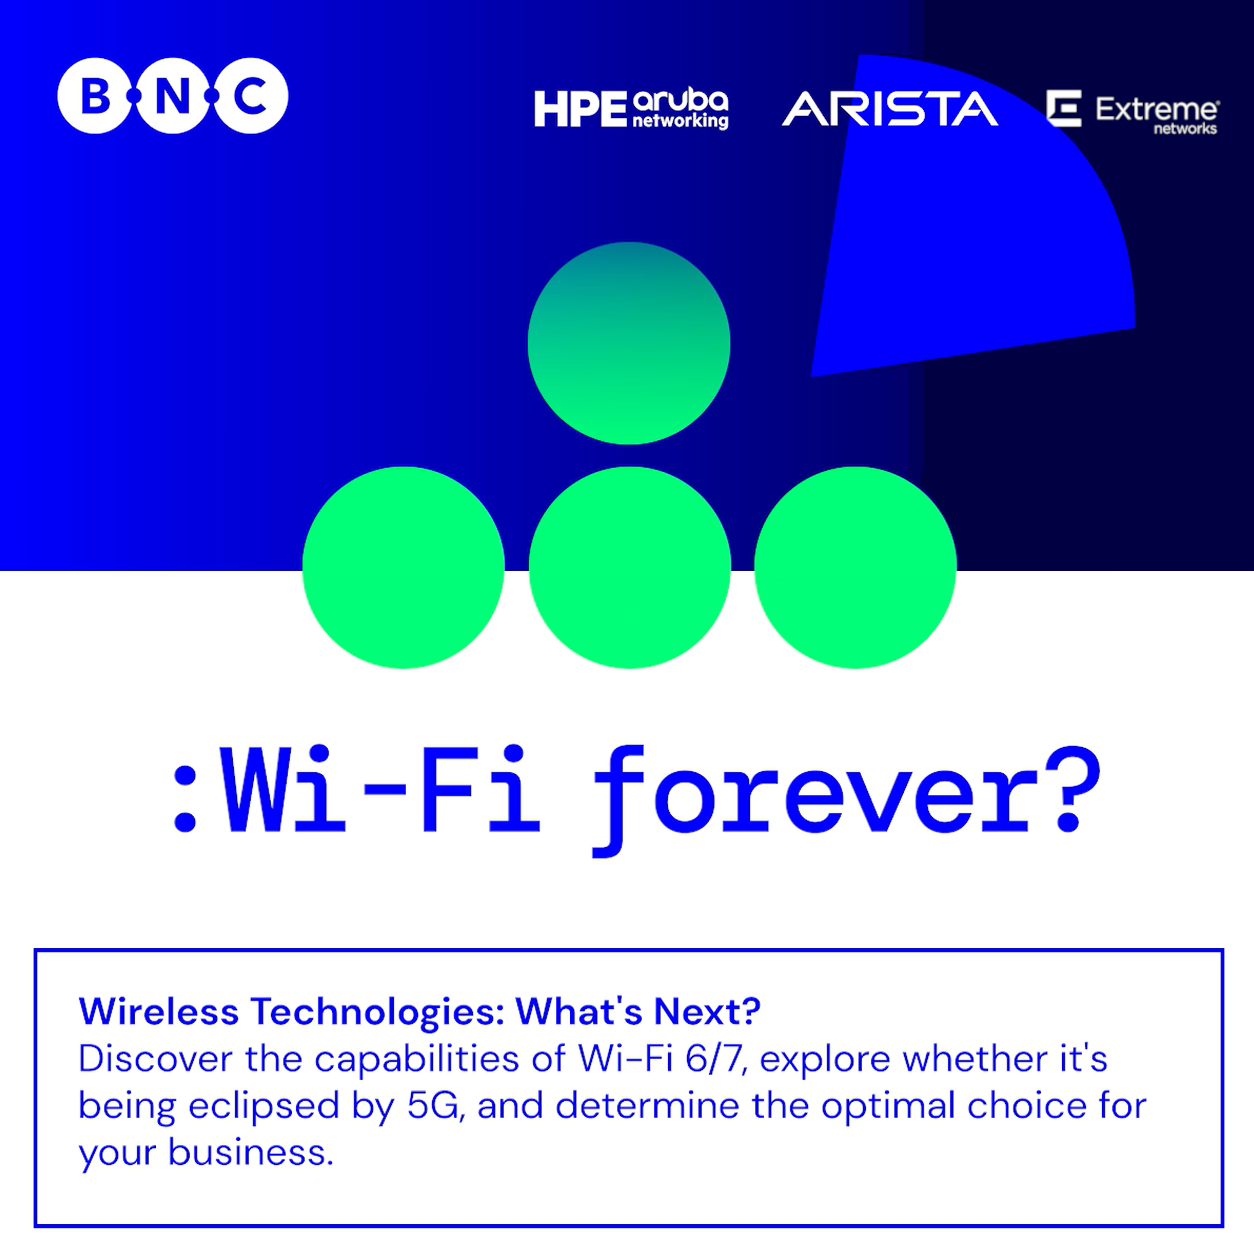 Wi-Fi Forever Campaign